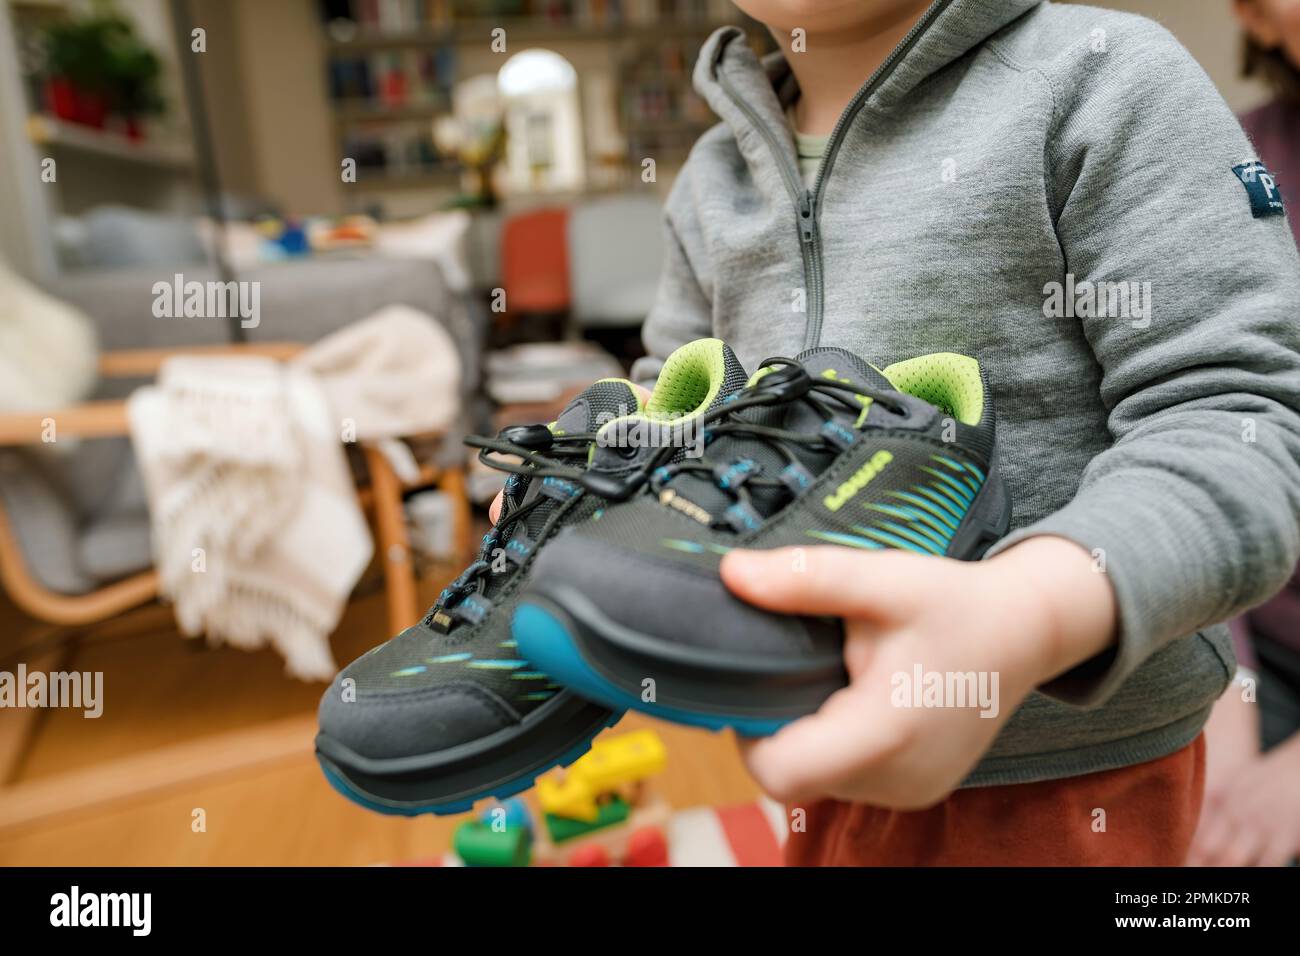 Frankfurt, Germany - Mar 12, 2023: A child showing modern, stylish Lowa  boots with vibrant blue and green design. Waterproof and insulated for  warmth in cold winter conditions Stock Photo - Alamy